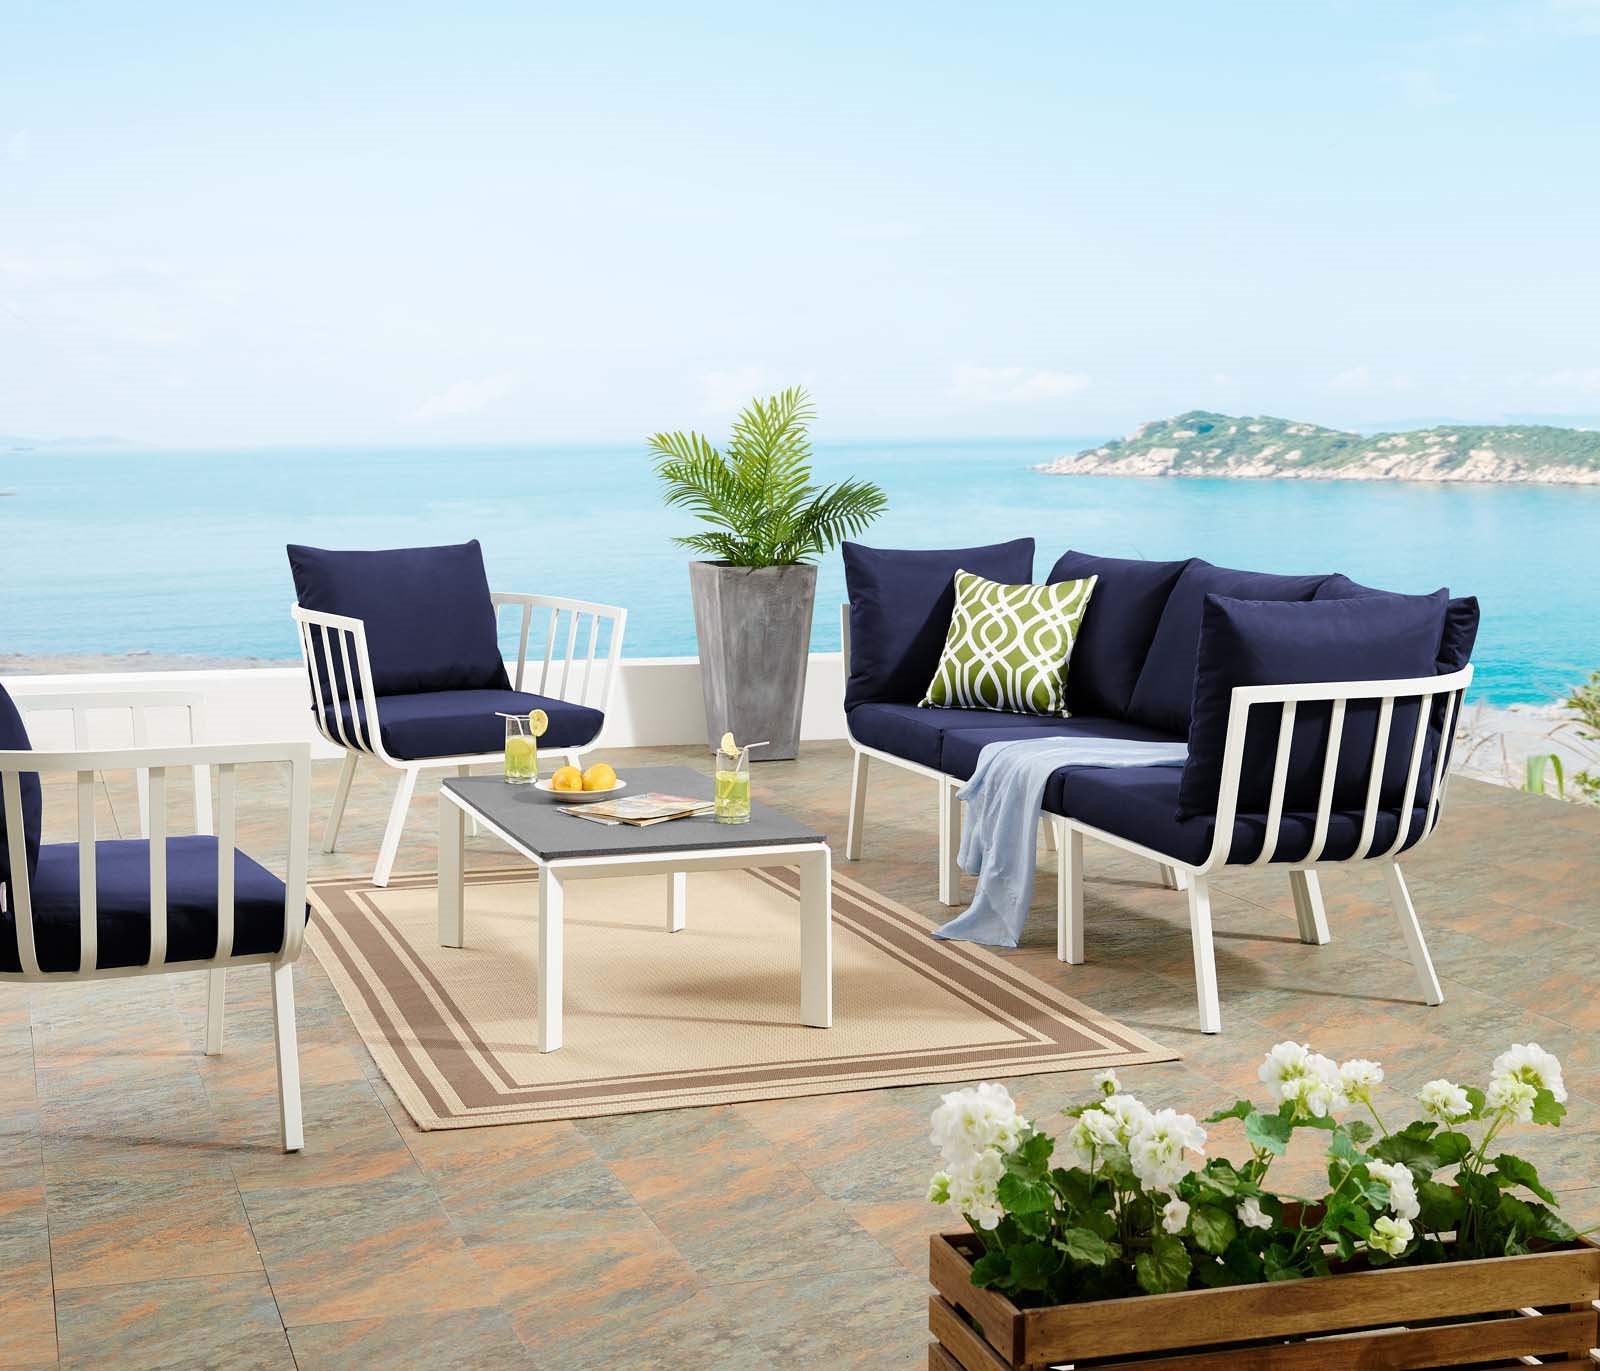 Lounge Sectional Sofa Chair Set, Aluminum, Metal, Steel, White Blue Navy, Modern Contemporary Urban Design, Outdoor Patio Balcony Cafe Bistro Garden Furniture Hotel Hospitality - image 2 of 10